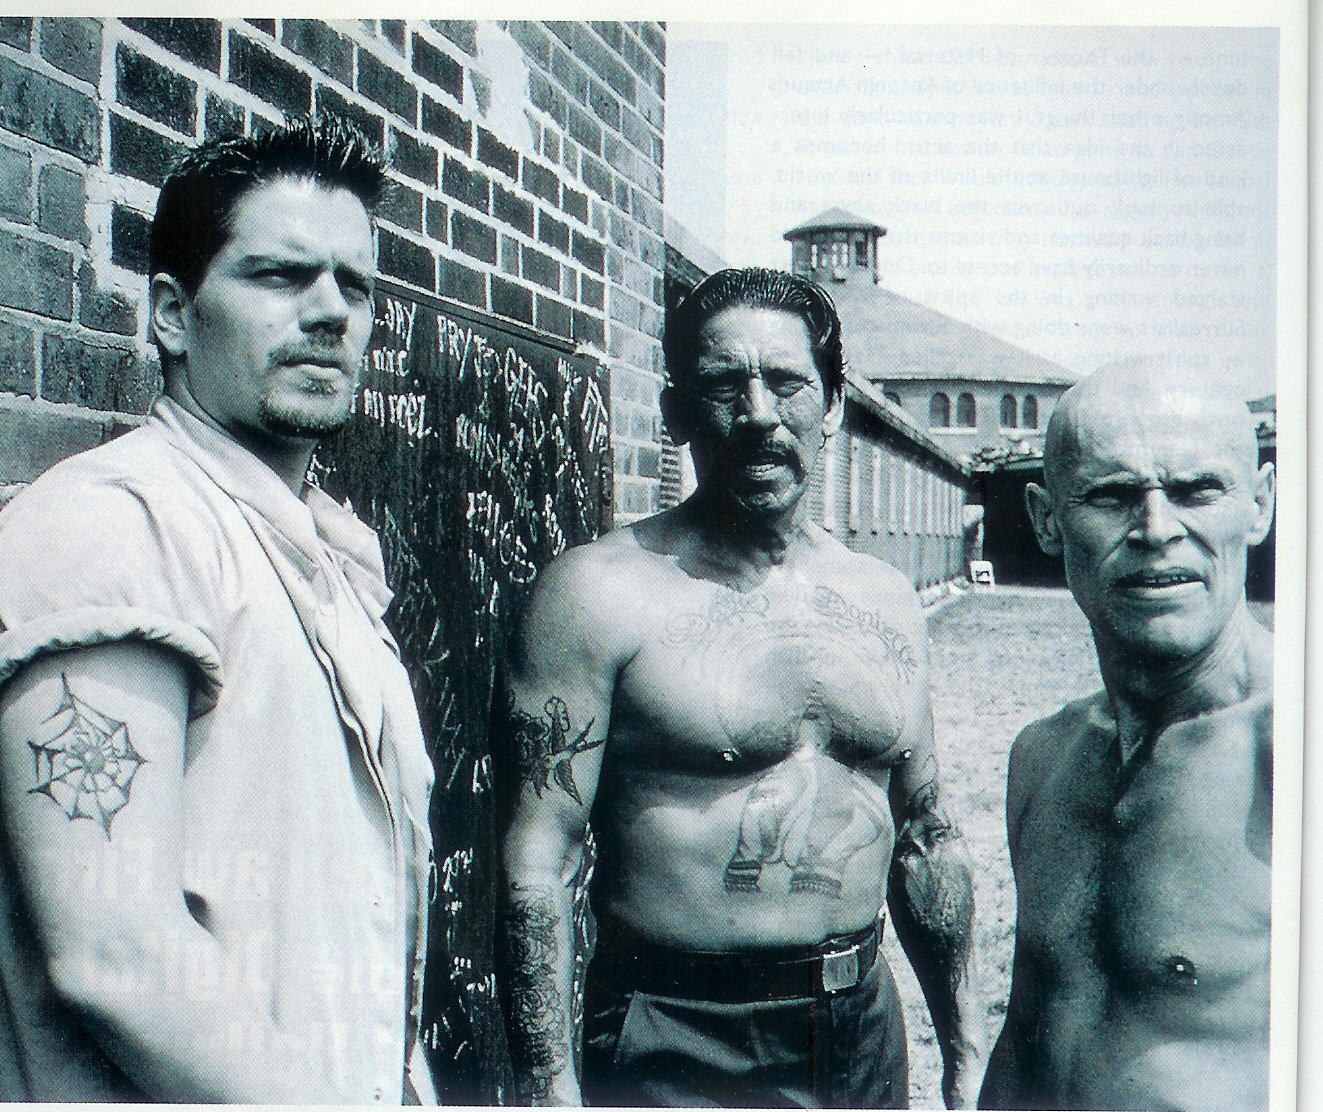 In Animal Factory with Danny Trejo and Willem Dafoe